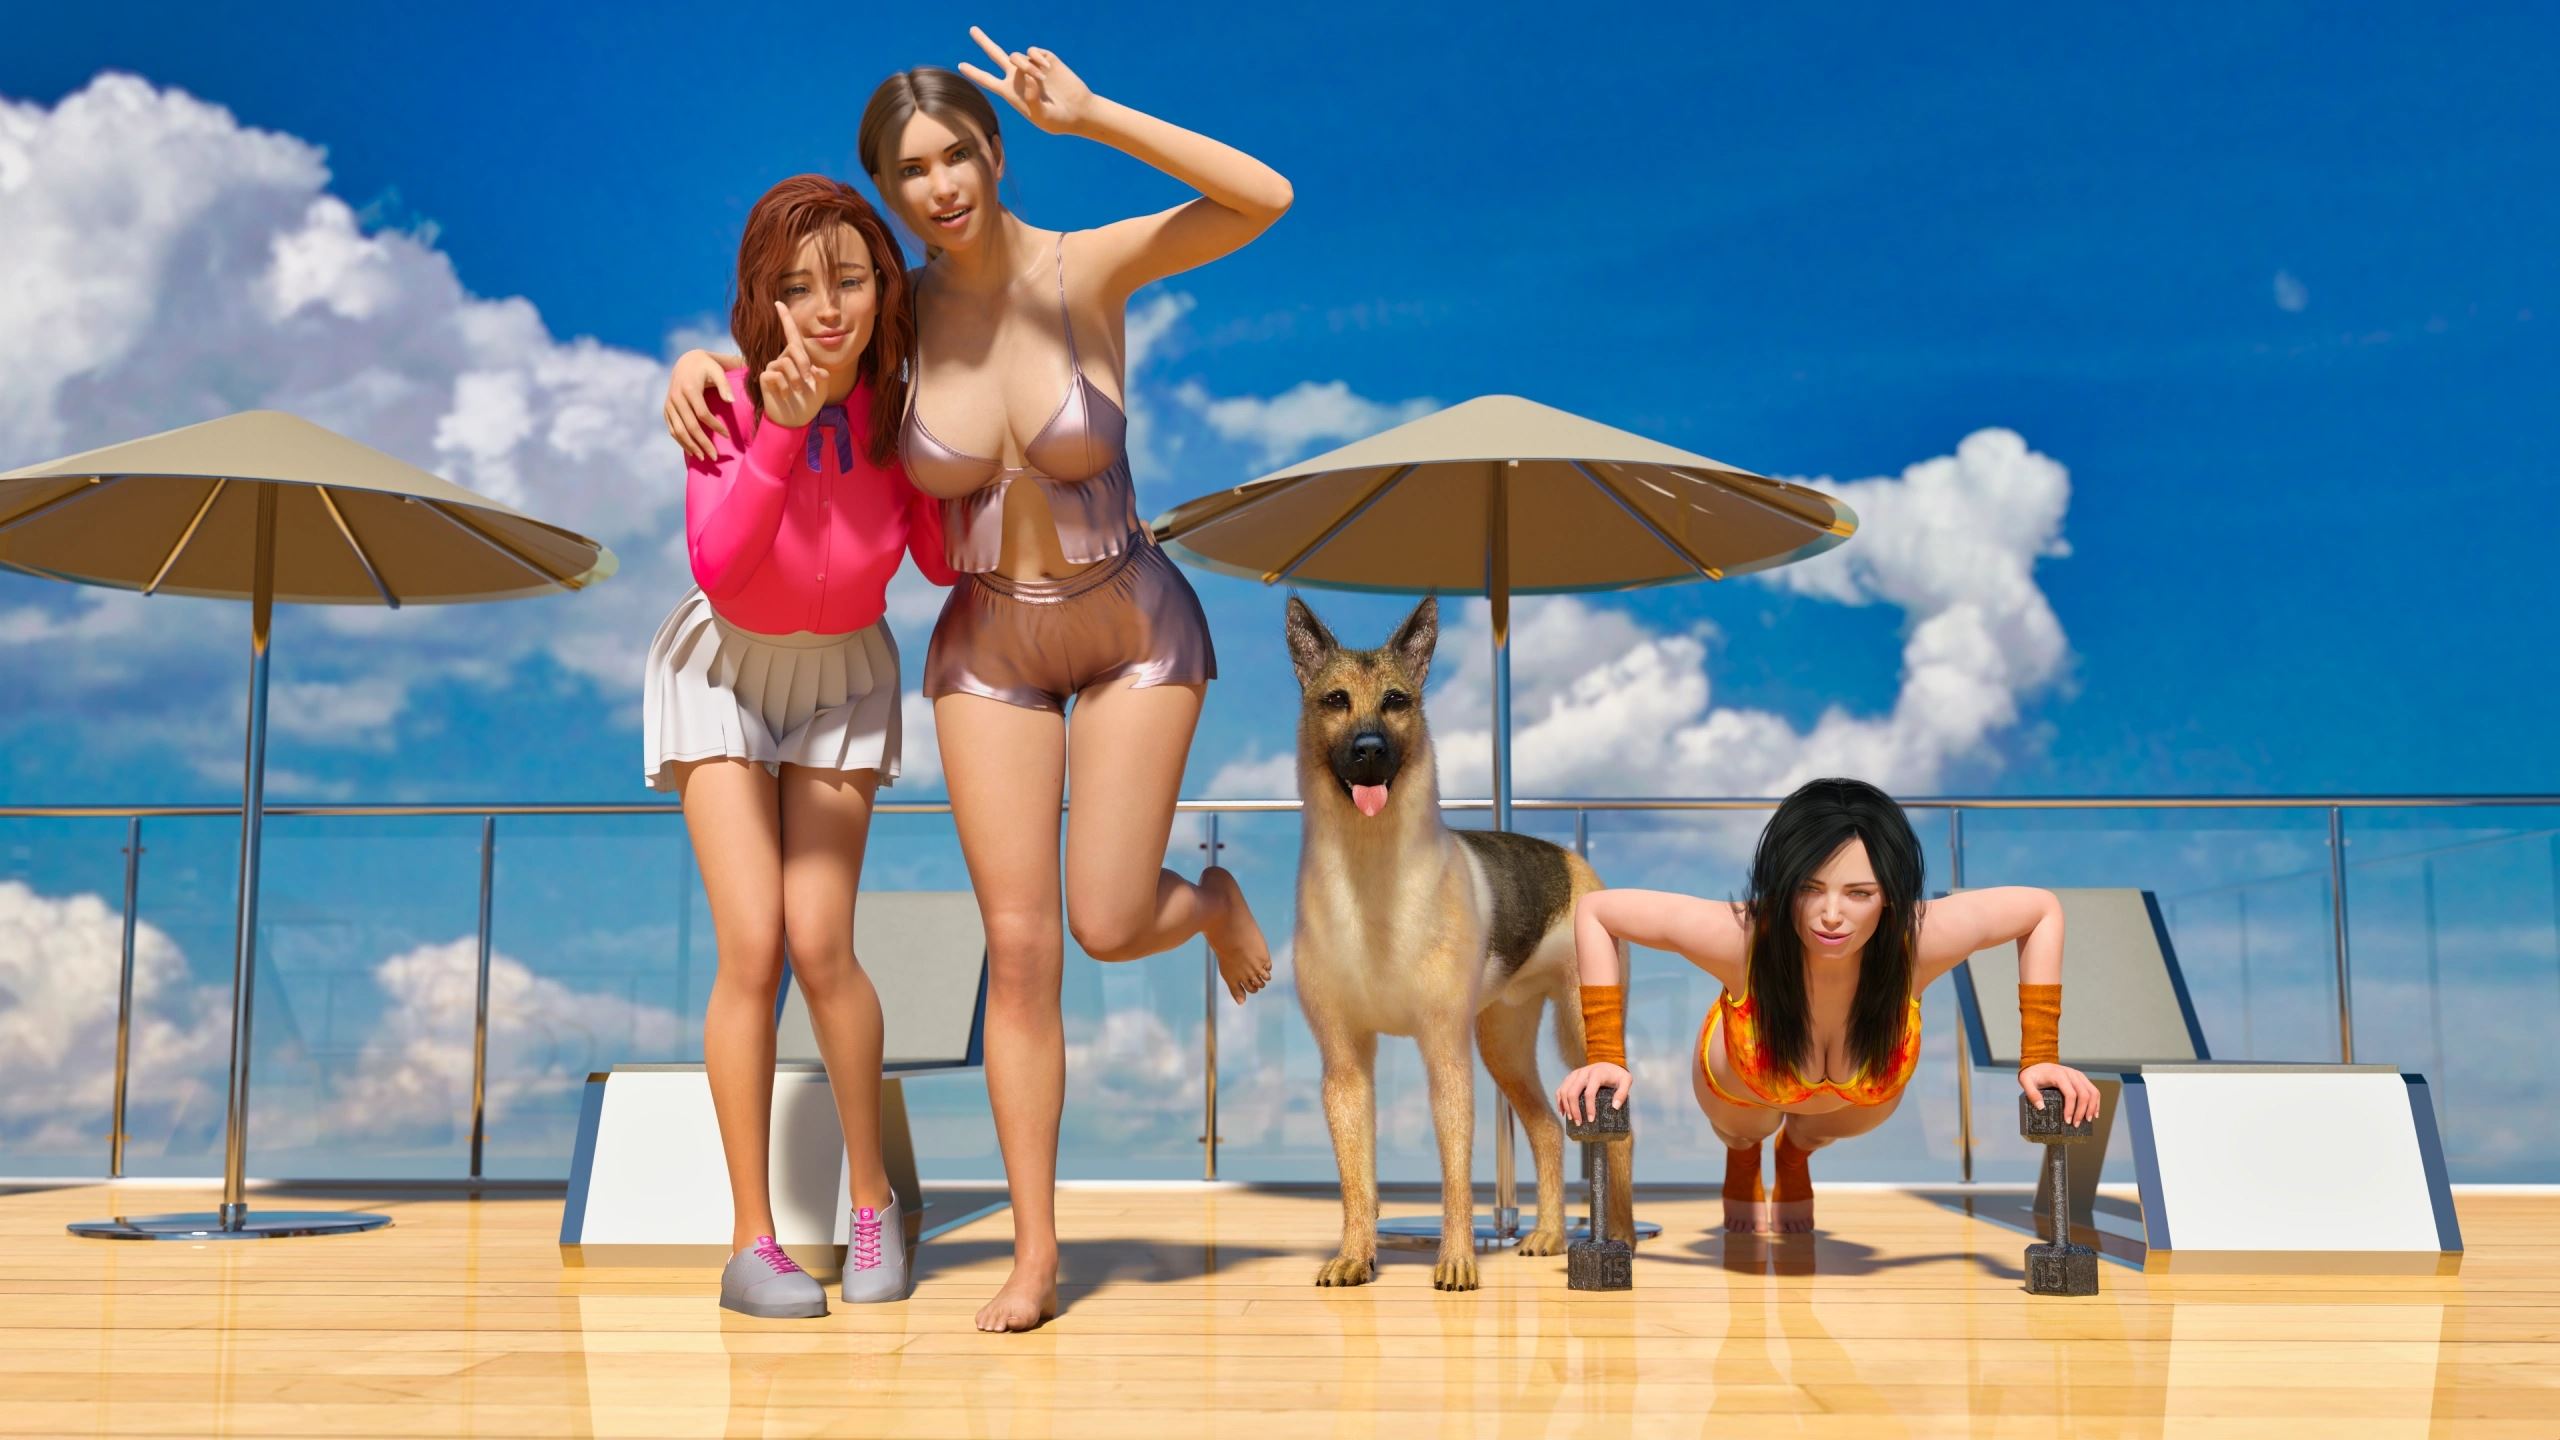 Sex Bff Download - Man's Best Friend Ren'Py Porn Sex Game v.Episode 1 Full Download for  Windows, MacOS, Linux, Android